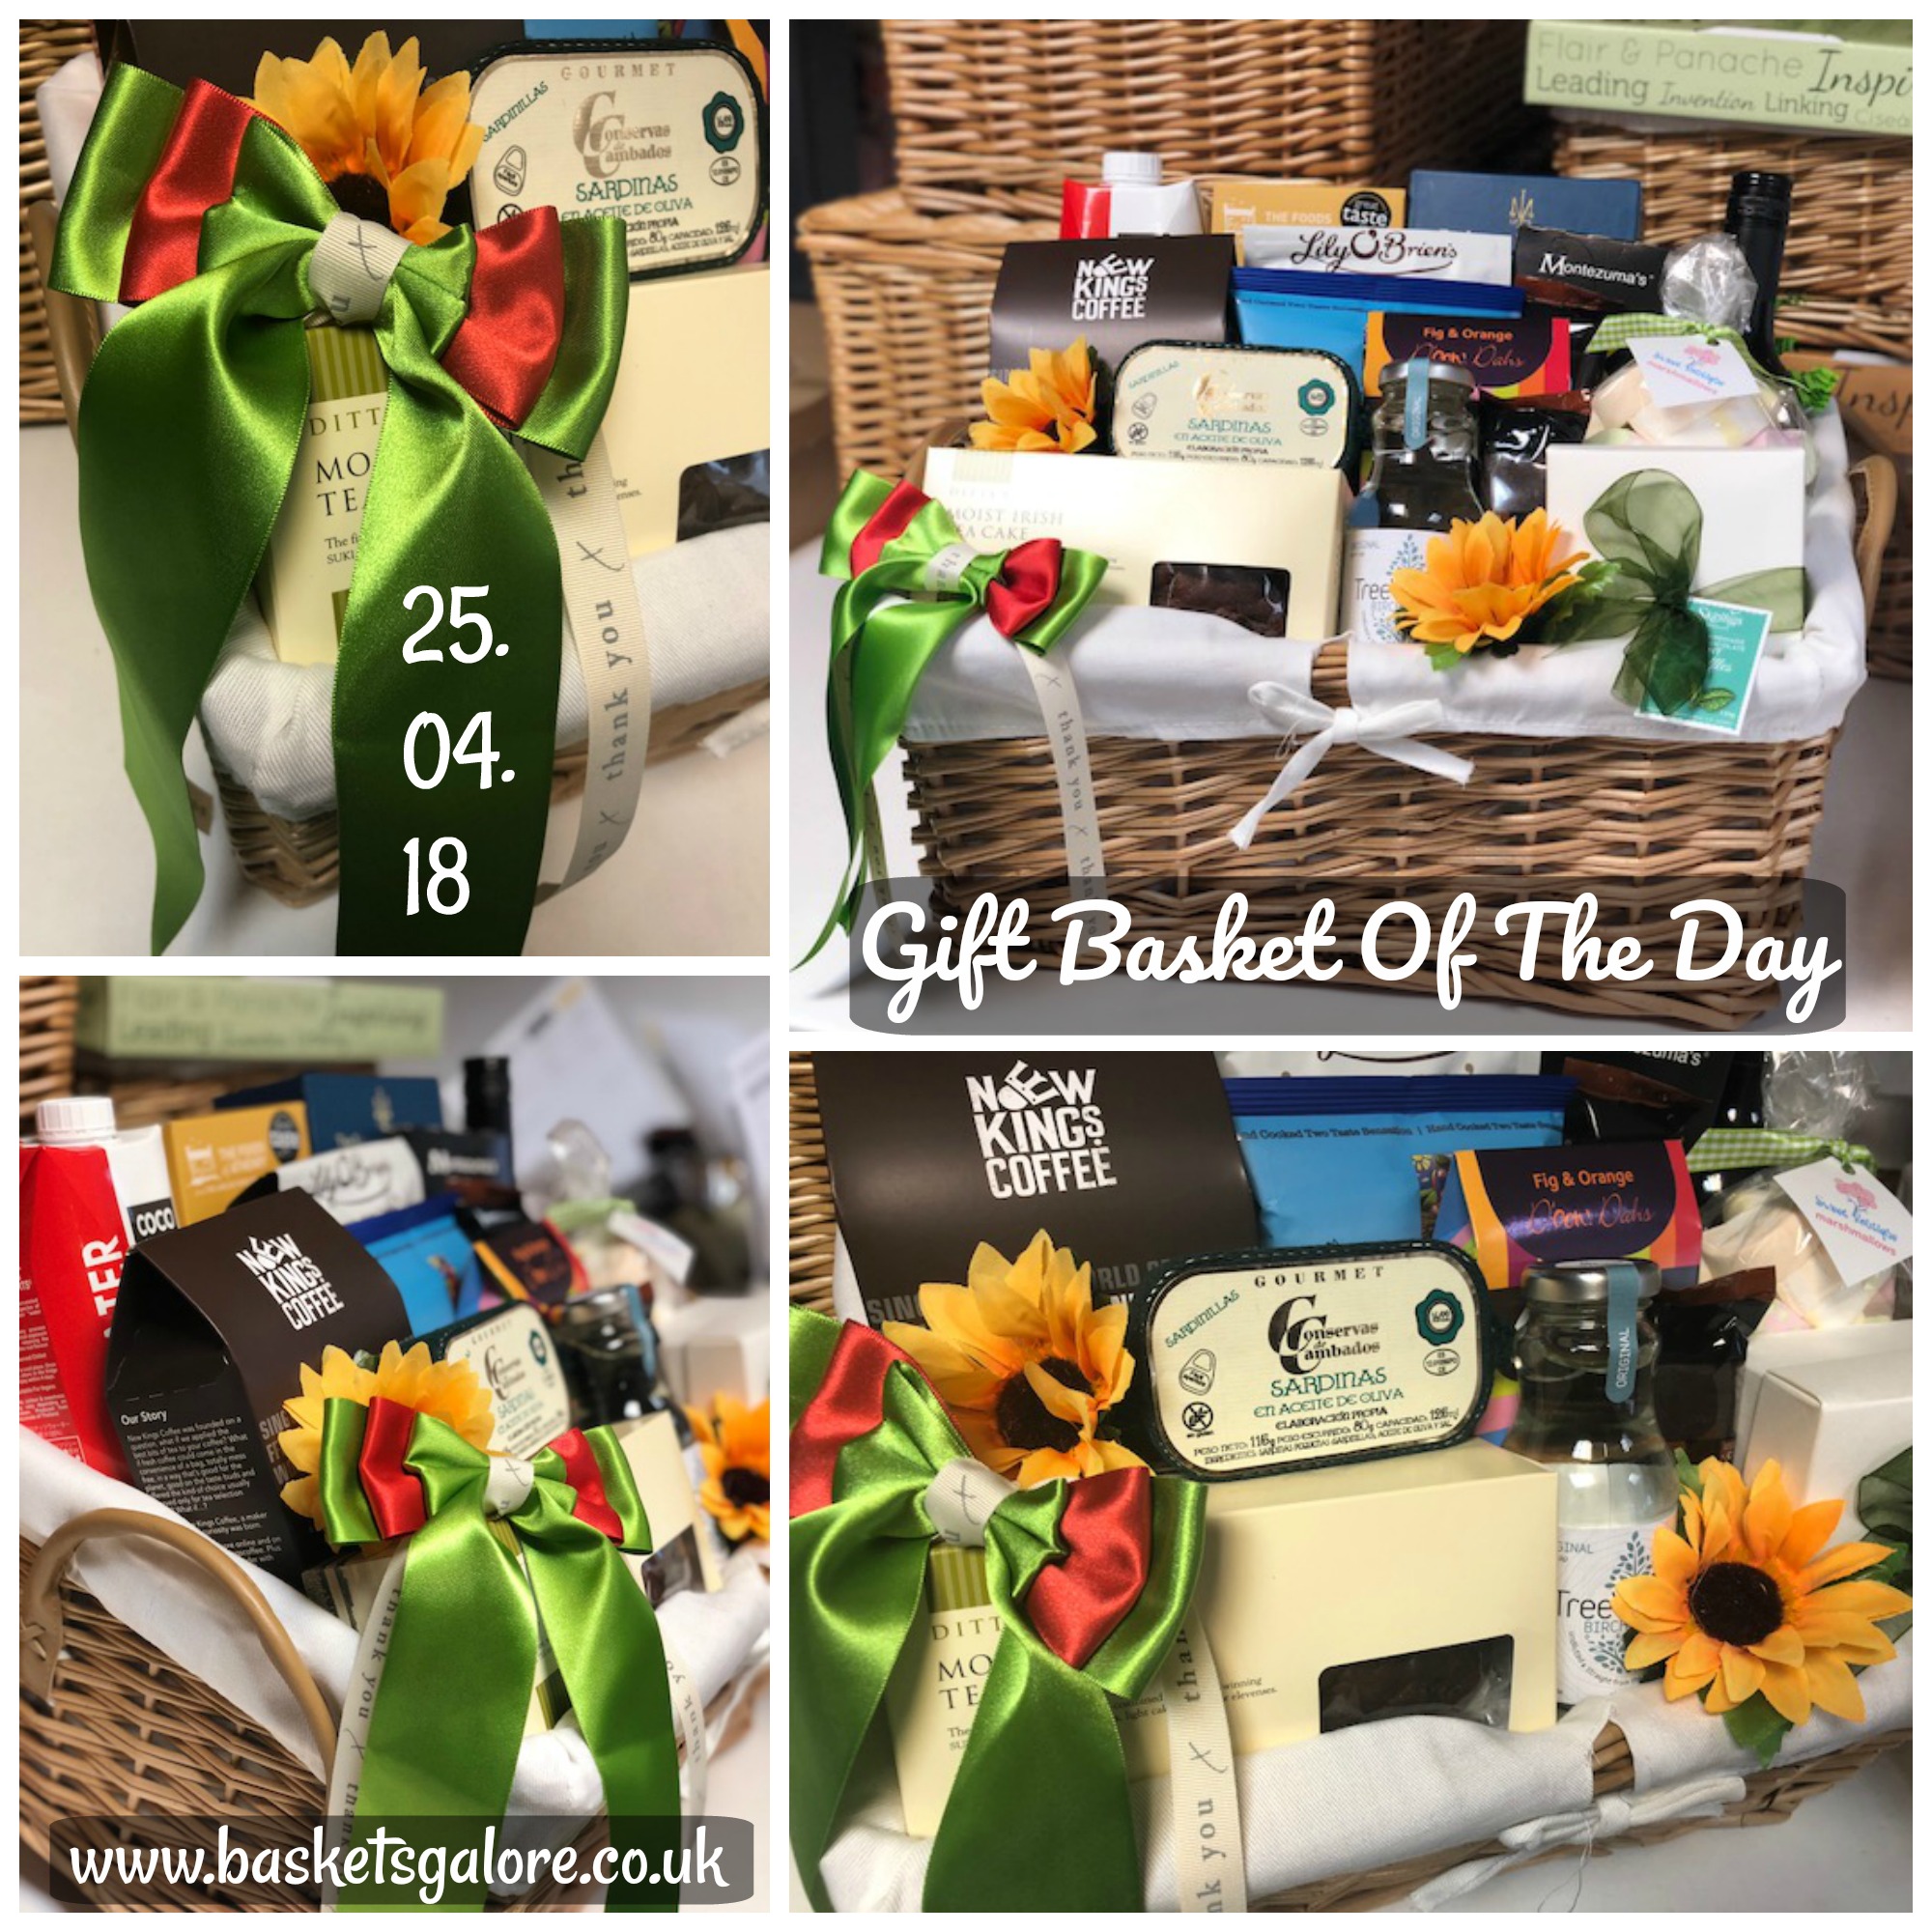 Baskets Galore’s Customer Gifts – Gift Basket of the Day 25.04.18